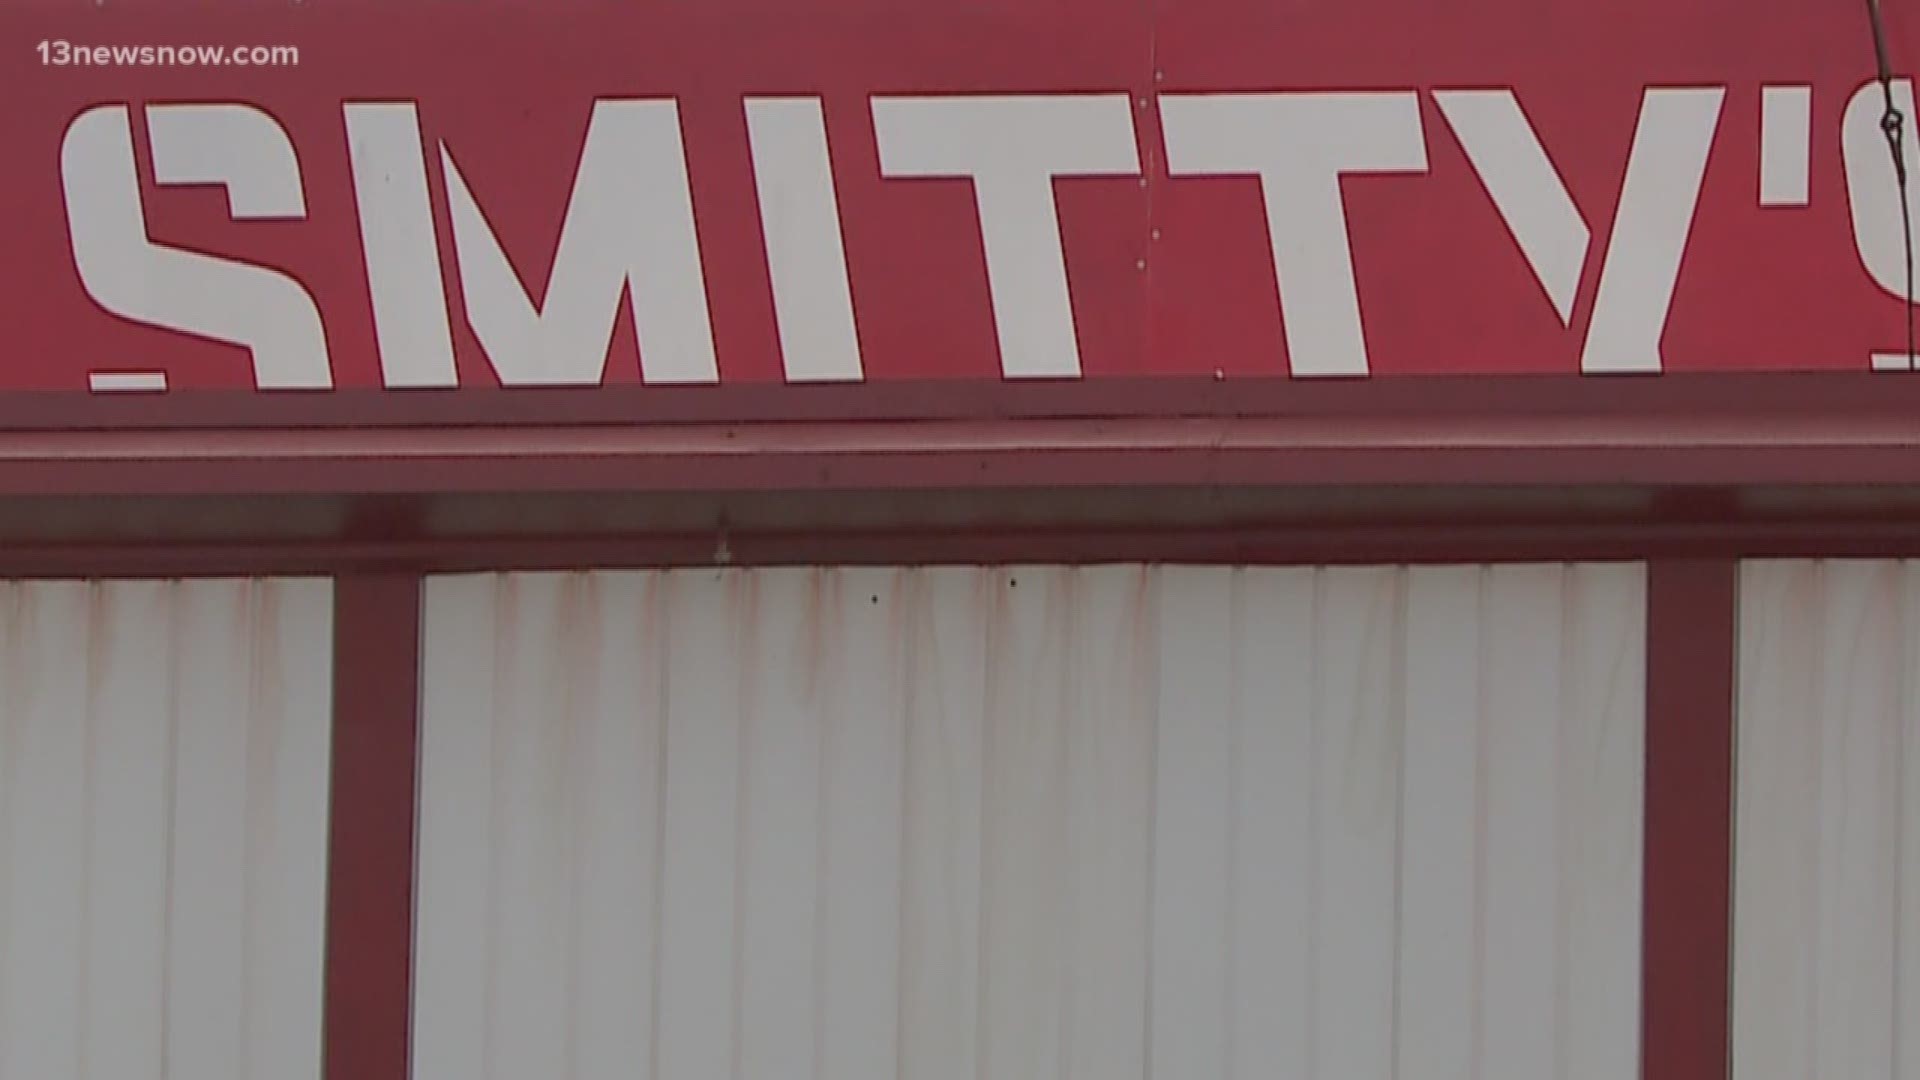 An overnight fire has led to the closing of Smitty's Better Burger, a staple in the Hampton community.